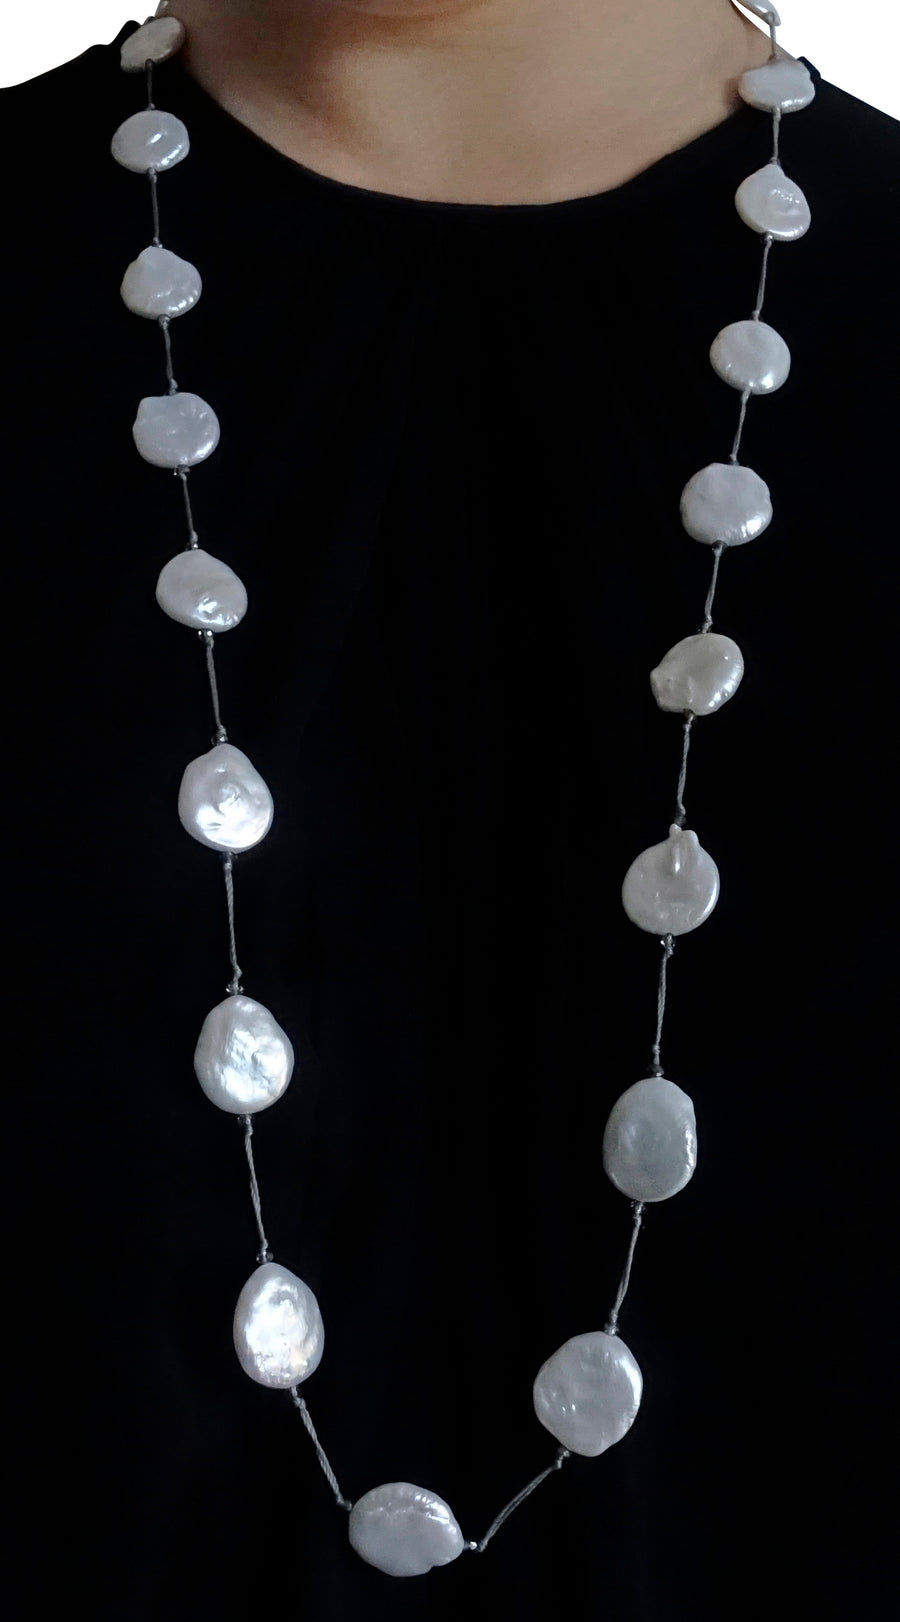 Array Pearl Necklaces On Translucent Glass Stock Photo 759546253 |  Shutterstock